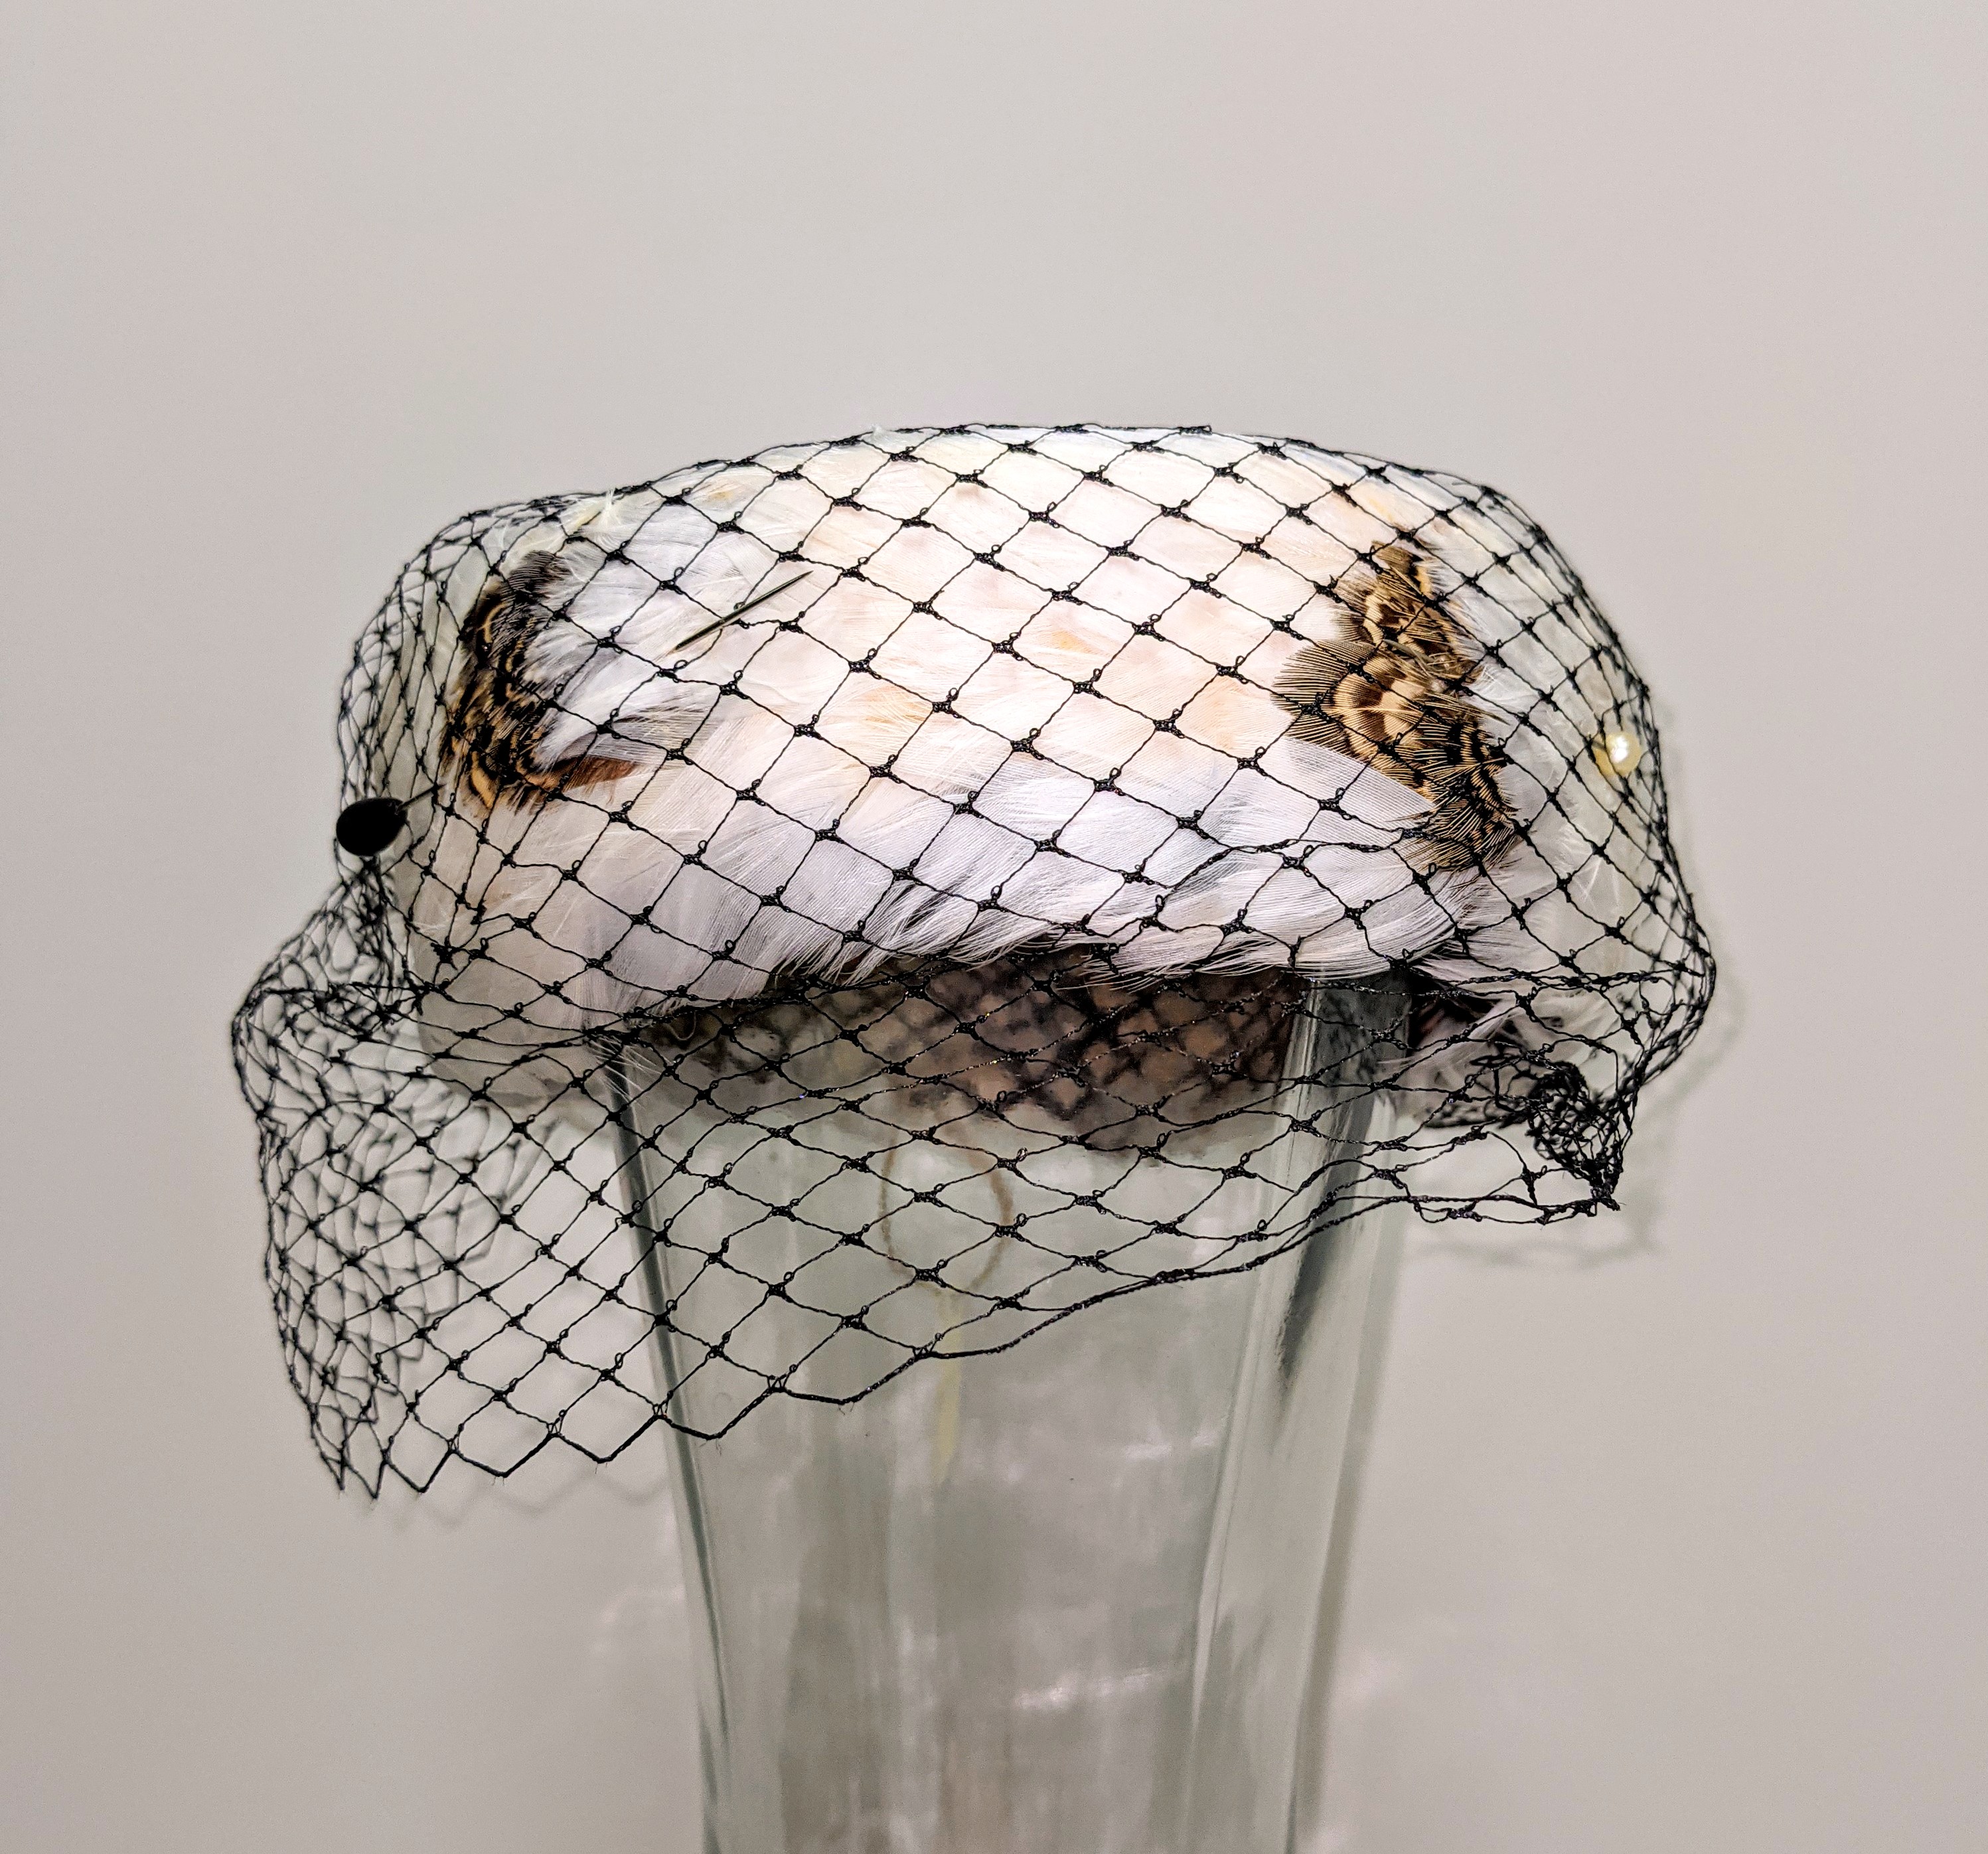 
This beautiful hat comes from the Jean Campbell collection and harkens back to fashion in the 40's. Hats were not rationed through WWII but rather were considered a luxury item and heavily taxed - sometimes up to 33%! Small hats like this one were worn askew and used hat pins to hold them in place. Though this hat has no tags or stamp to label the maker - it likely isn't homemade considering it is made of real feathers (not chicken) with a plastic veil to cover the face.

29/11/2021
2002.81 / Campbell, Jean